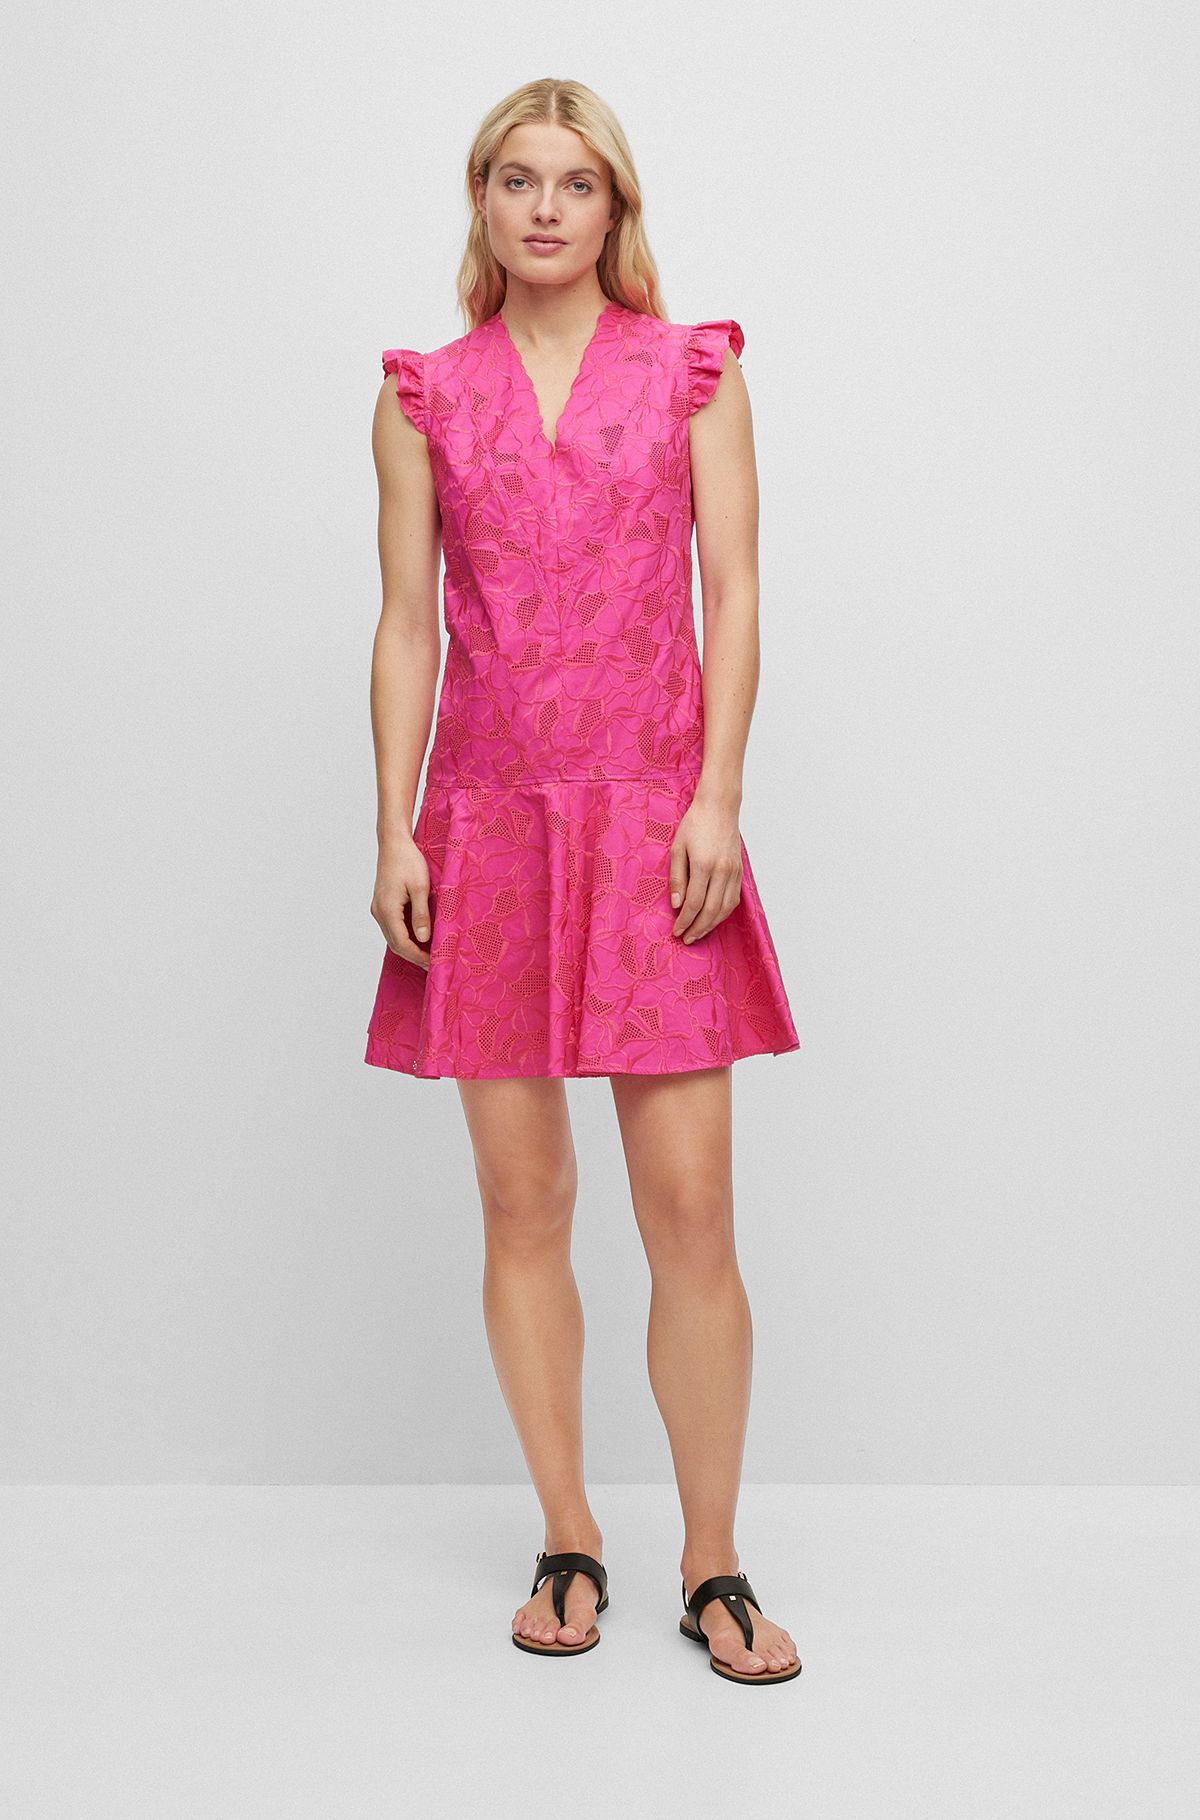 Cotton-lace dress with scalloped edging, Pink